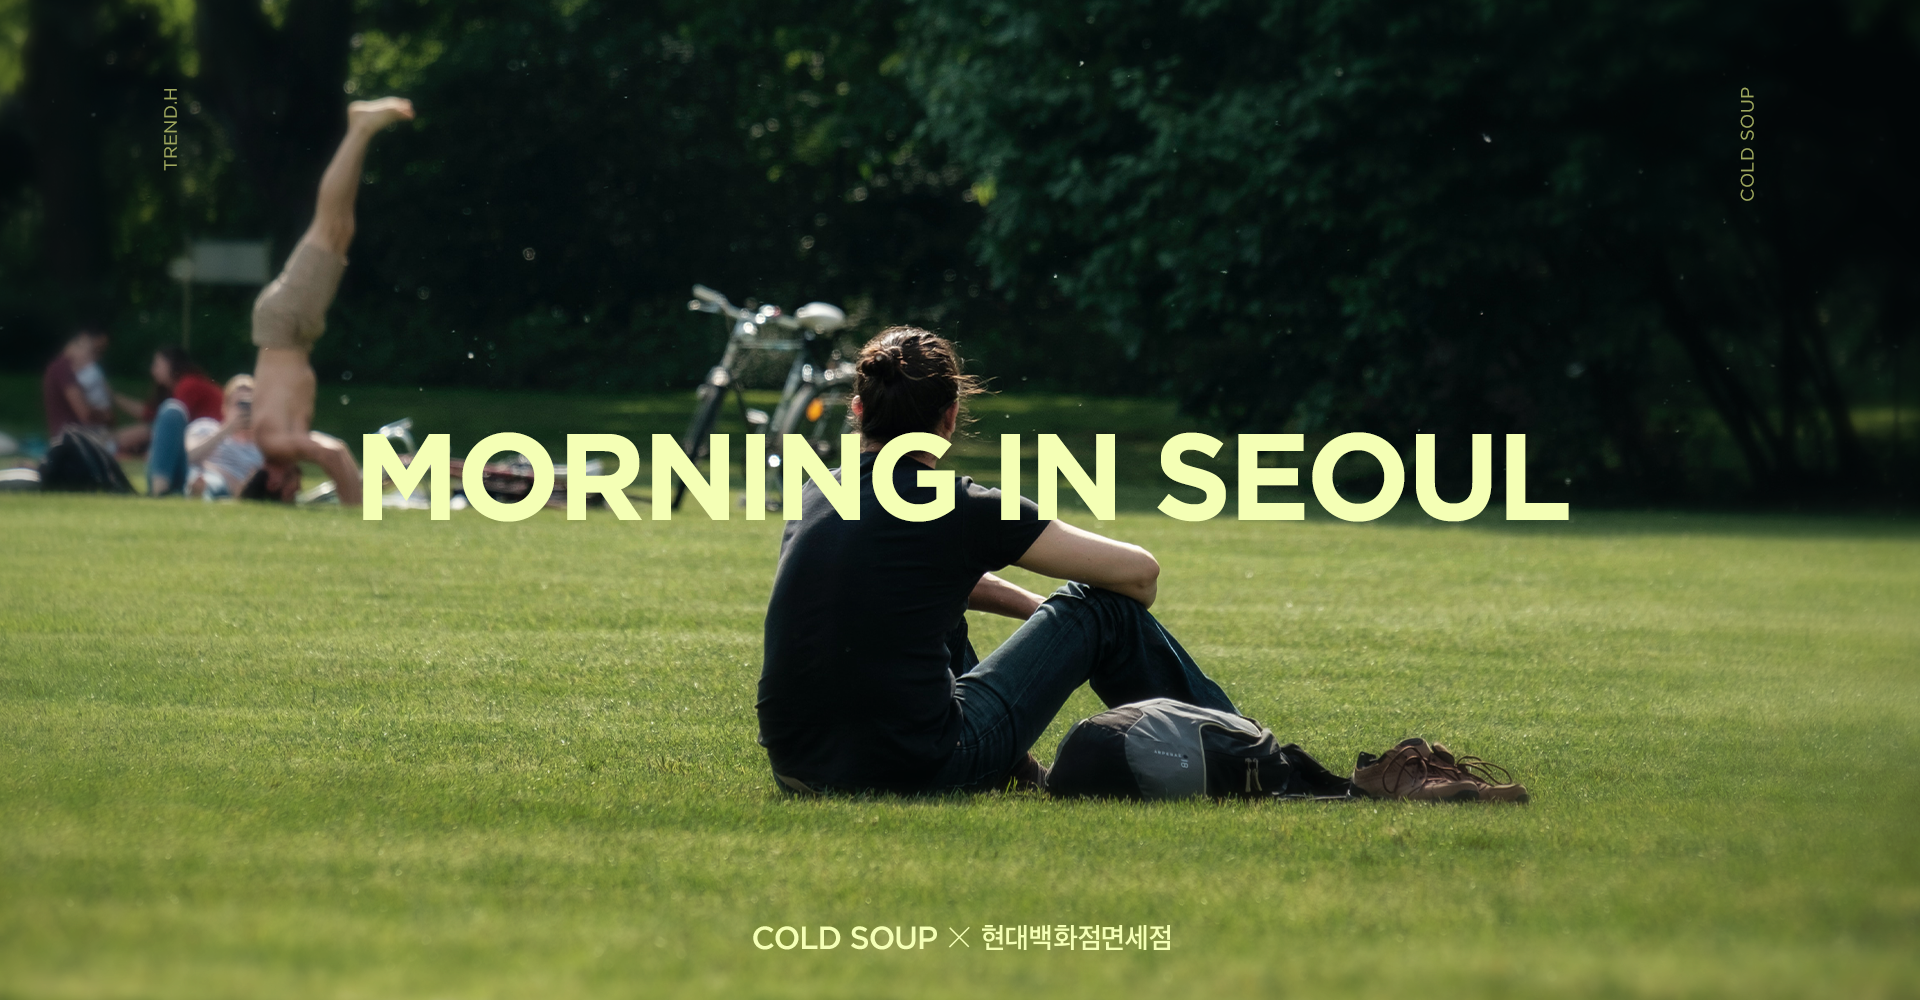 MORNING IN SEOUL by COLD SOUP X 현대백화점면세점